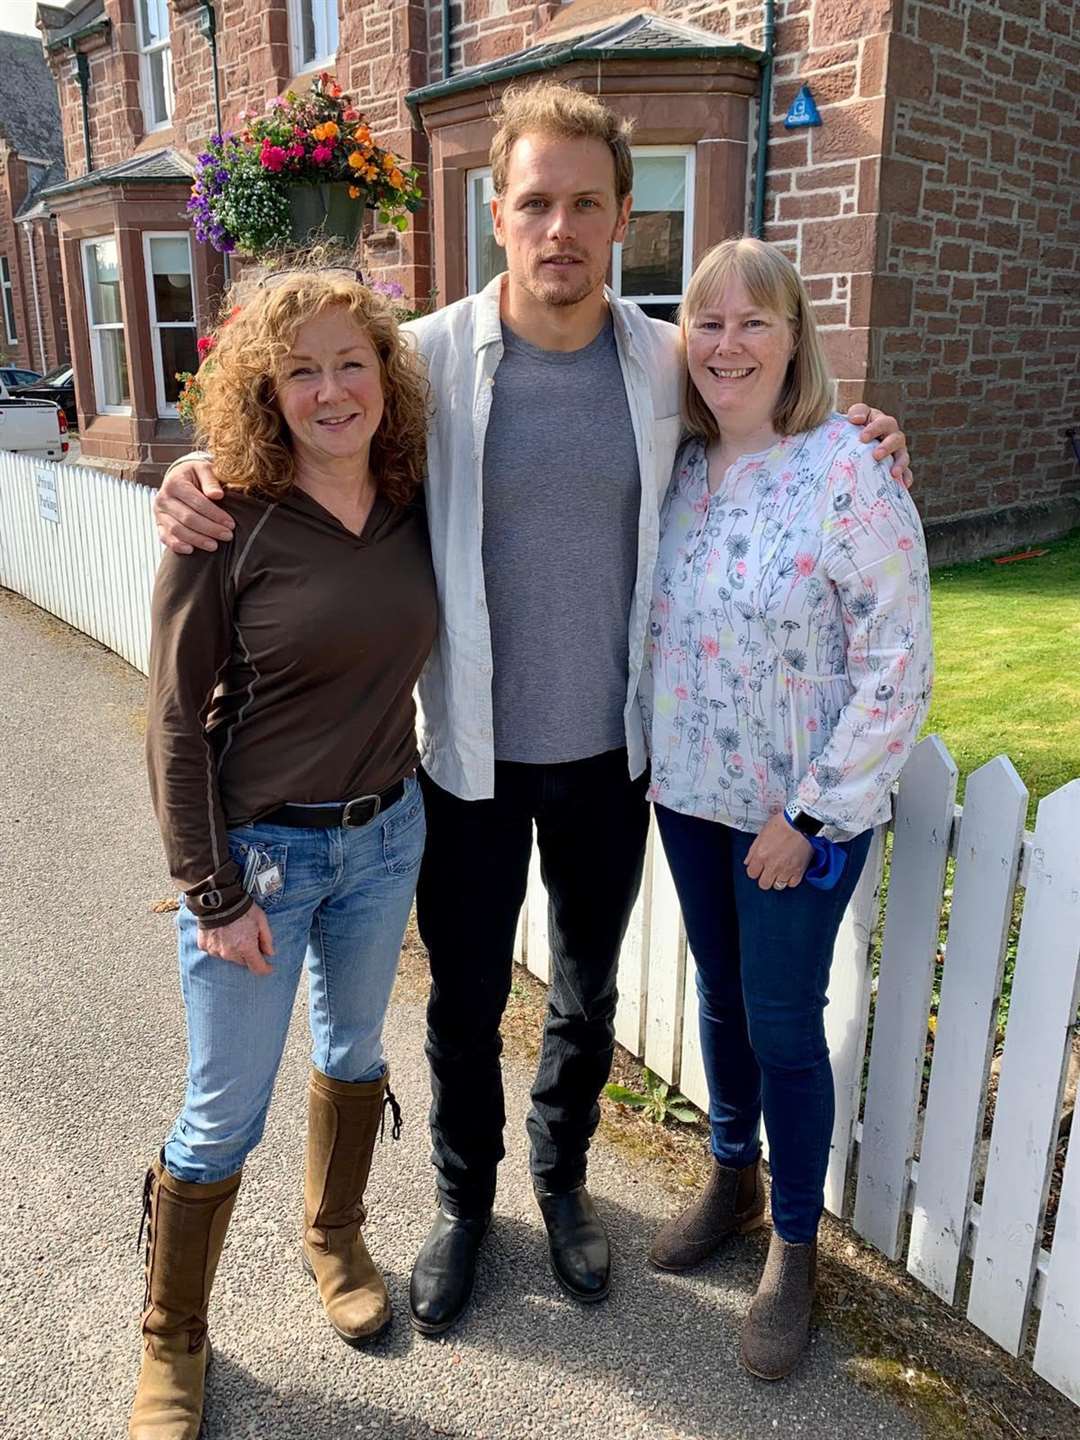 Sam Heughan was photographed as he filmed for Men in Kilts around the Highlands. He is pictured here with Inverness Outlanders Caroline Keith and Mhairi Jarvis in Inverness.